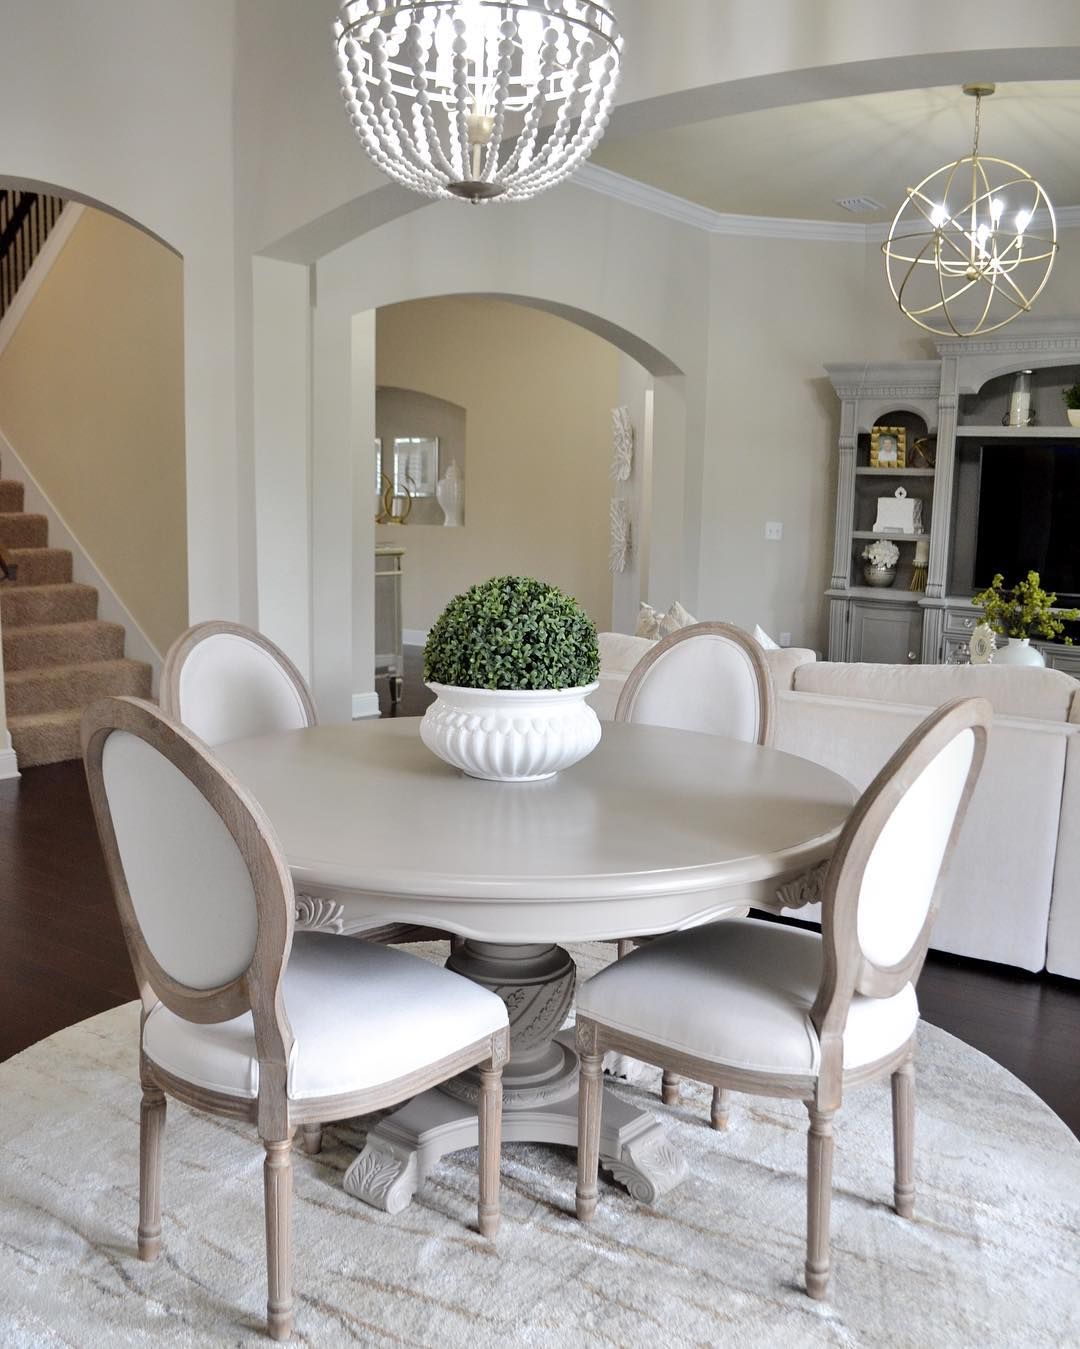 Glam Dining Room with Gray French Chairs via @saltgrassdecor